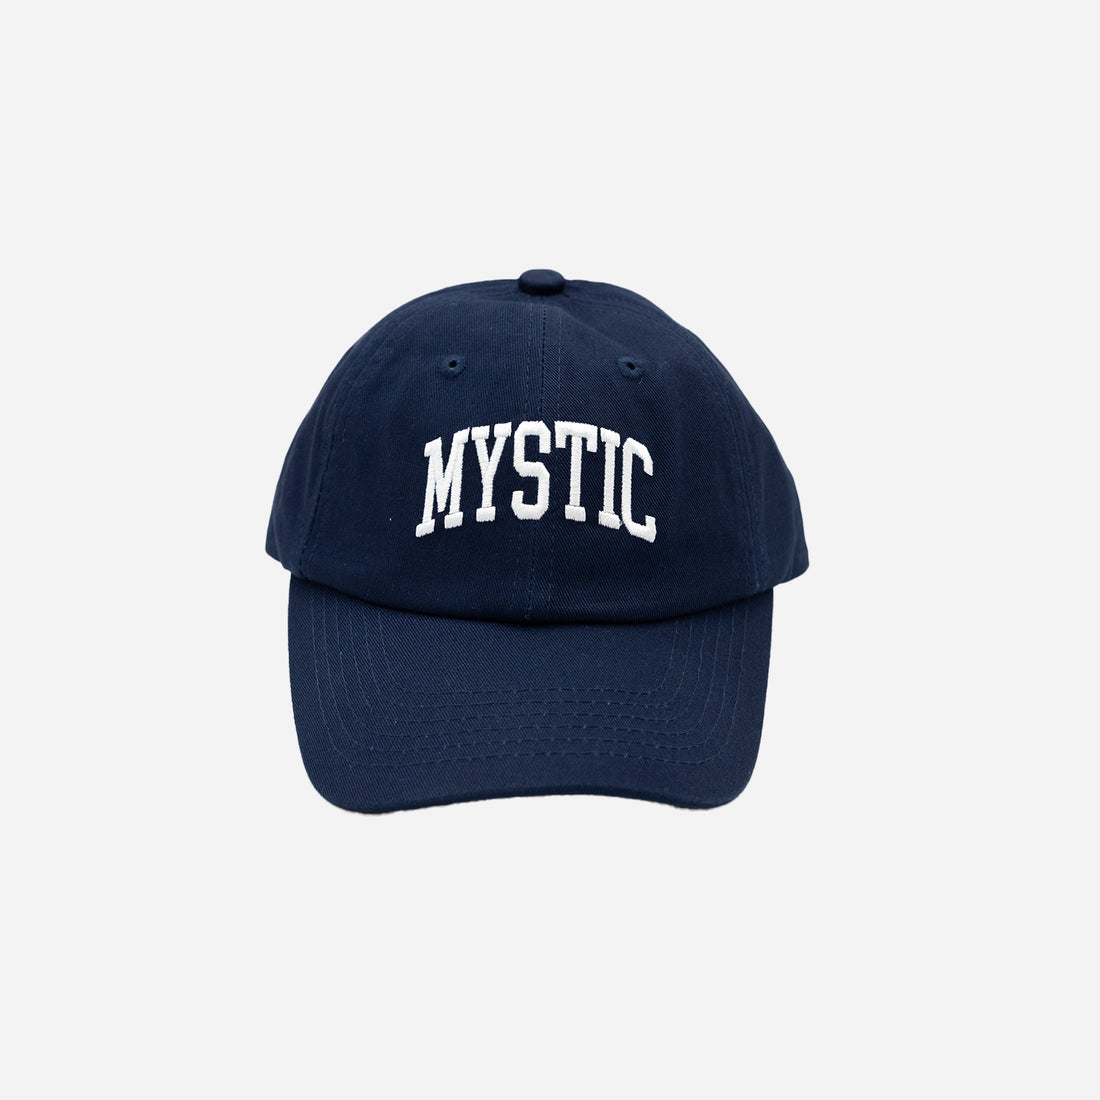 Youth & Kids Apparel from Just Mystic – Just Mystic Brand